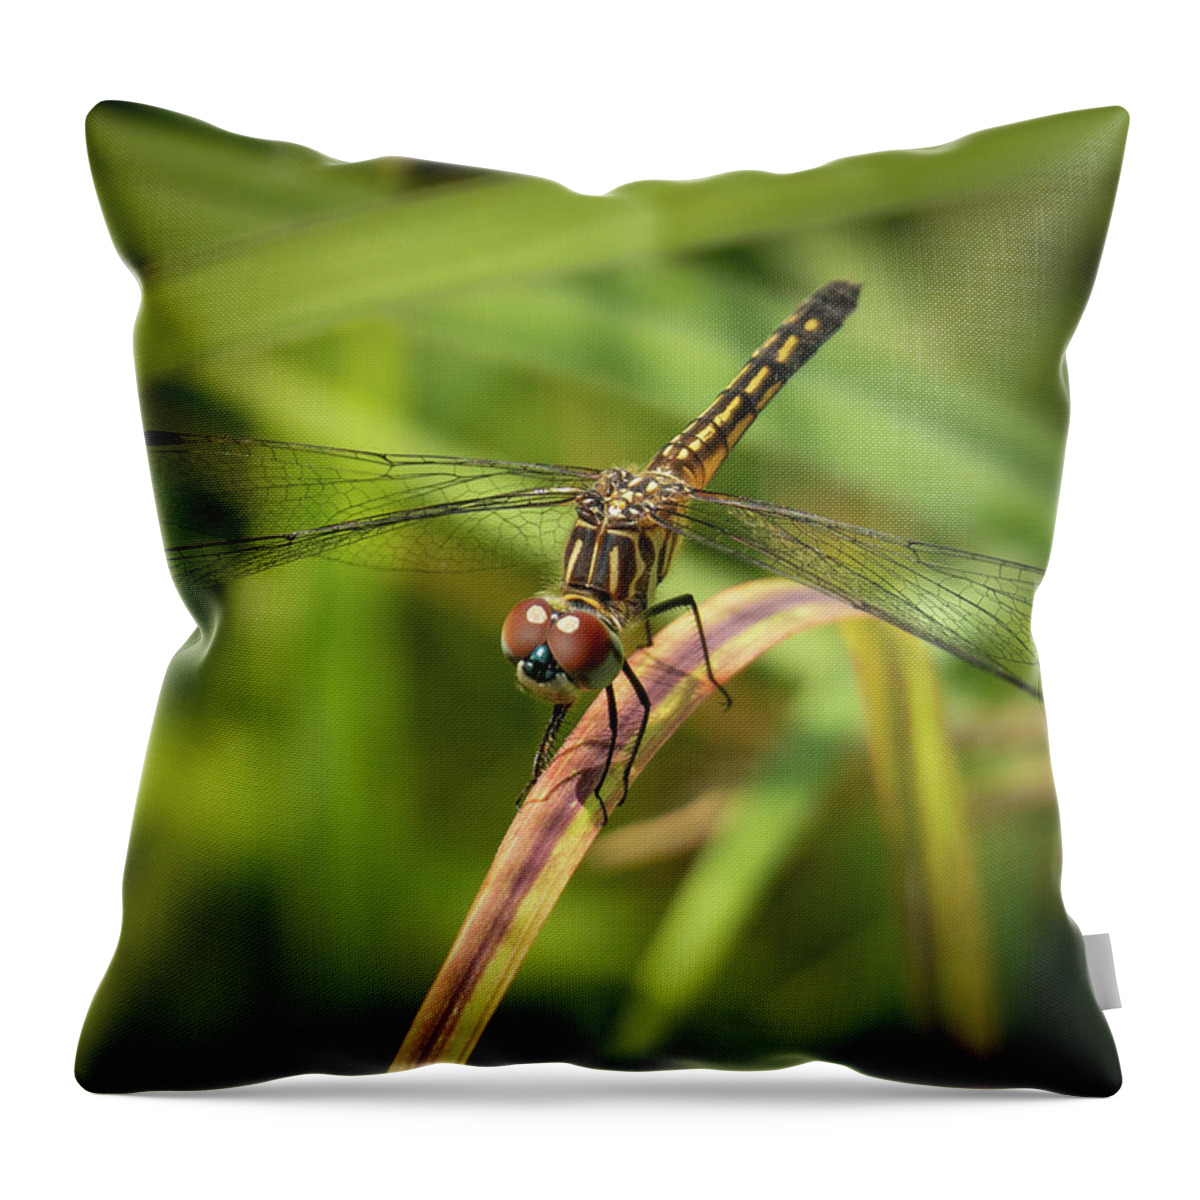 Dragonfly Throw Pillow featuring the photograph Dragonfly by David Morehead